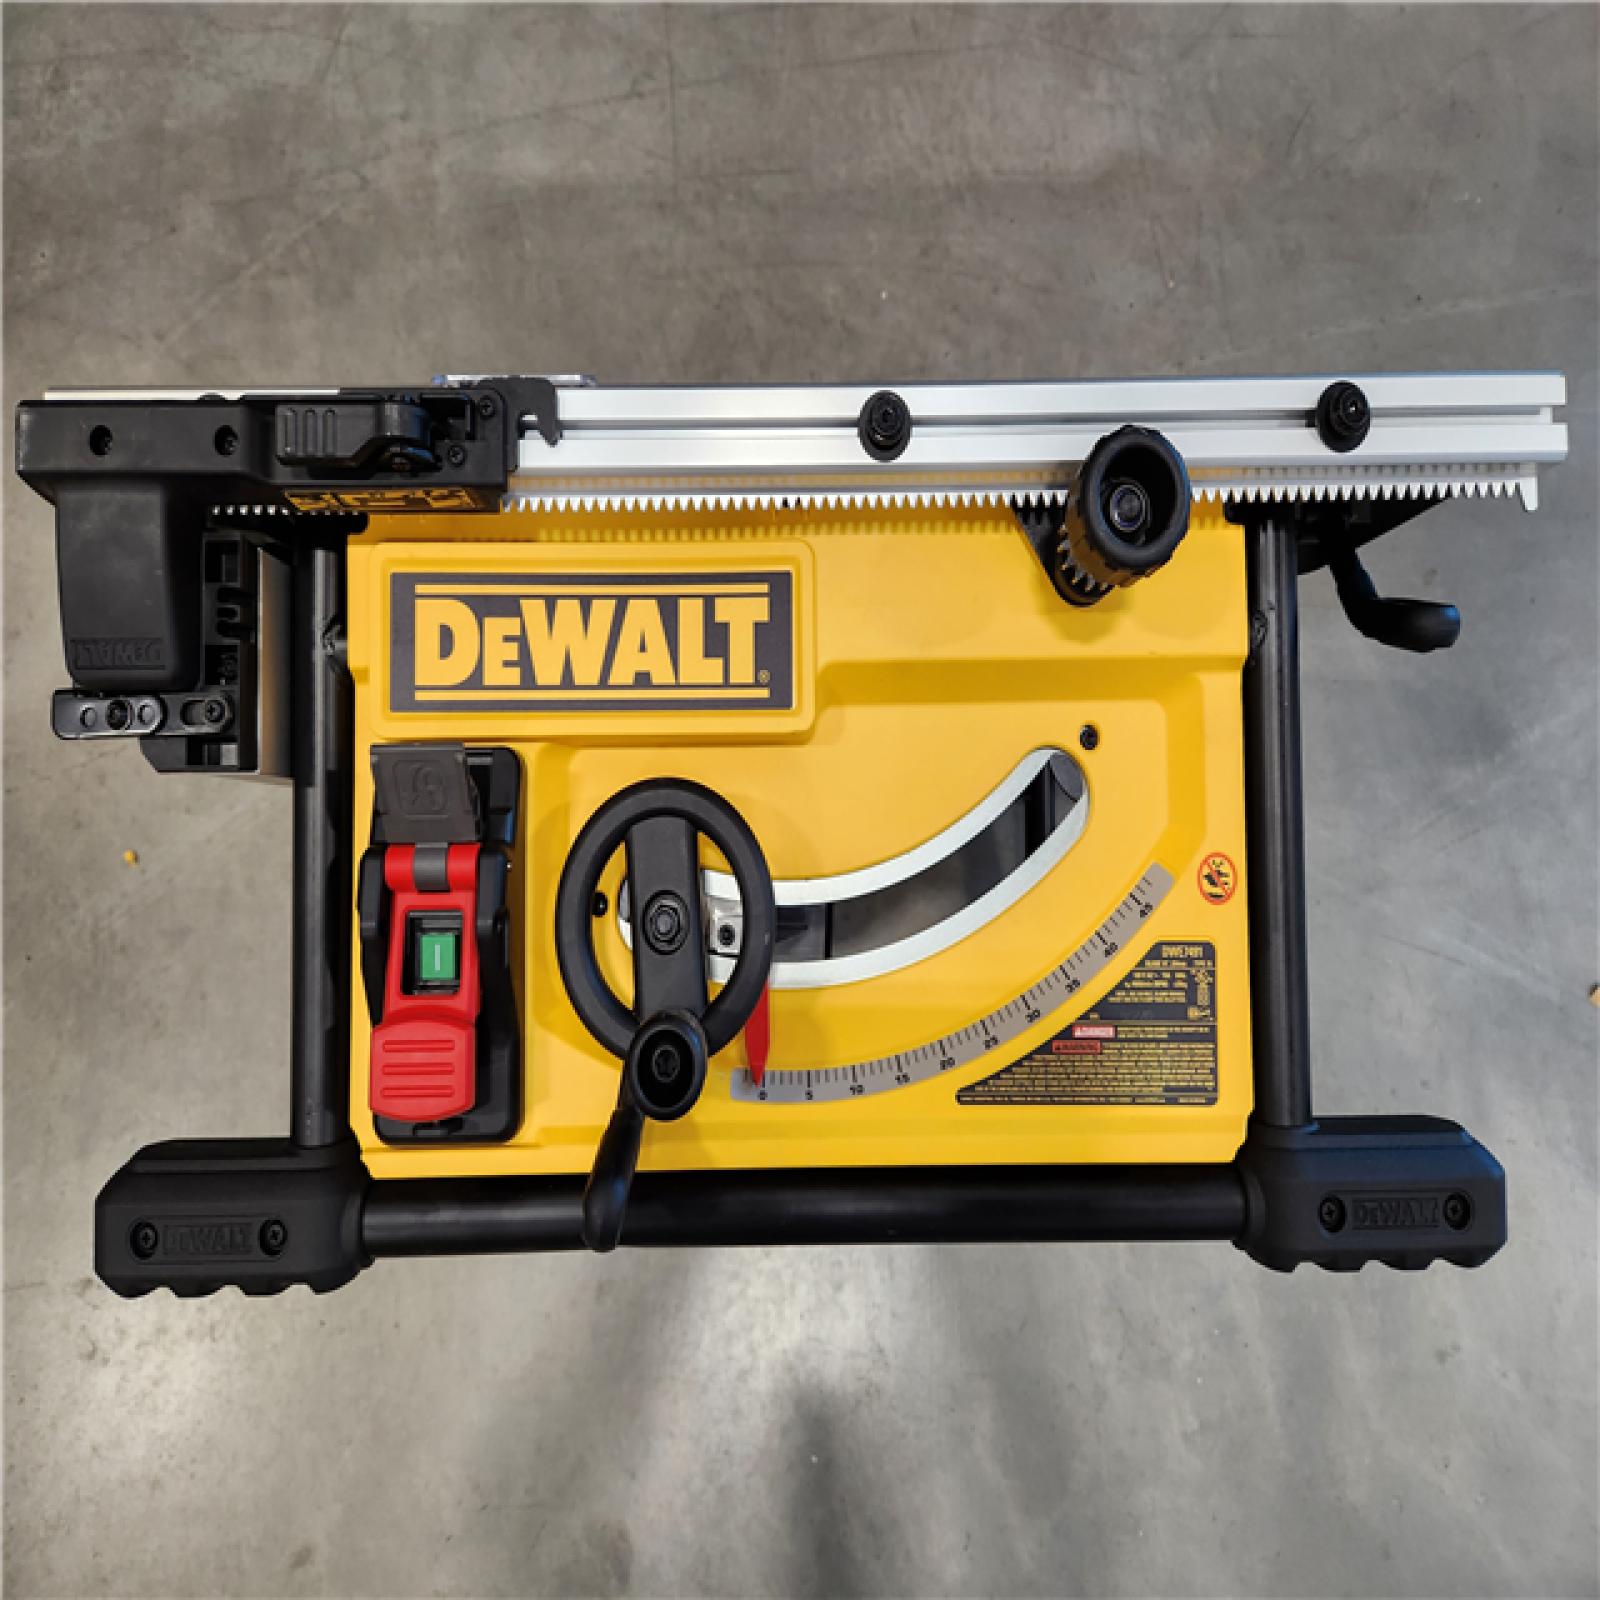 AS-IS DEWALT 15-Amp Corded 10 in. Compact Job Site Table Saw